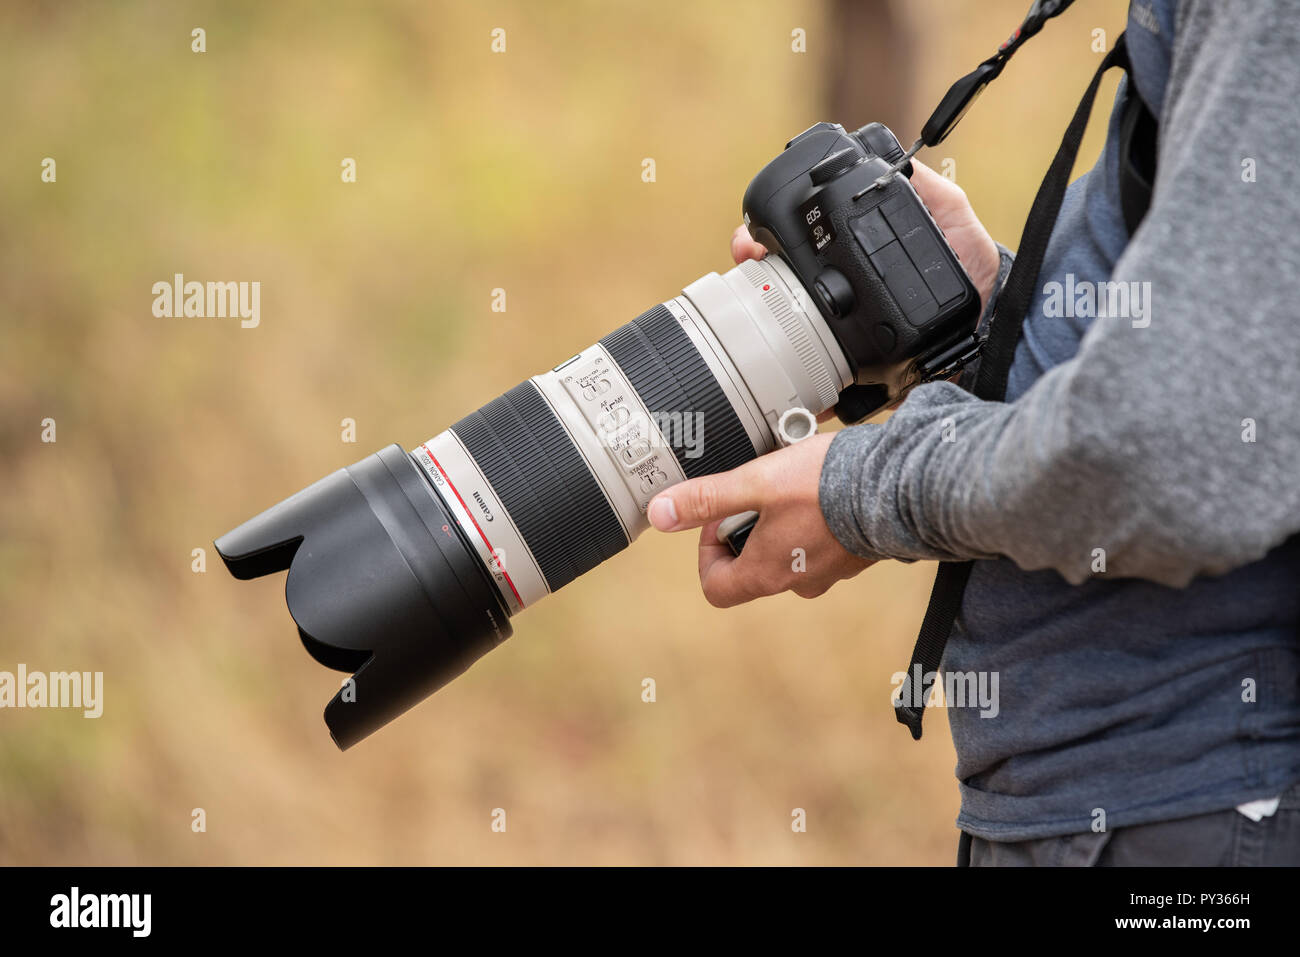 Battle Ground, WA / USA - August 25 2018: Male person holding Canon 5D Mark IV with 70-200 lens. Stock Photo